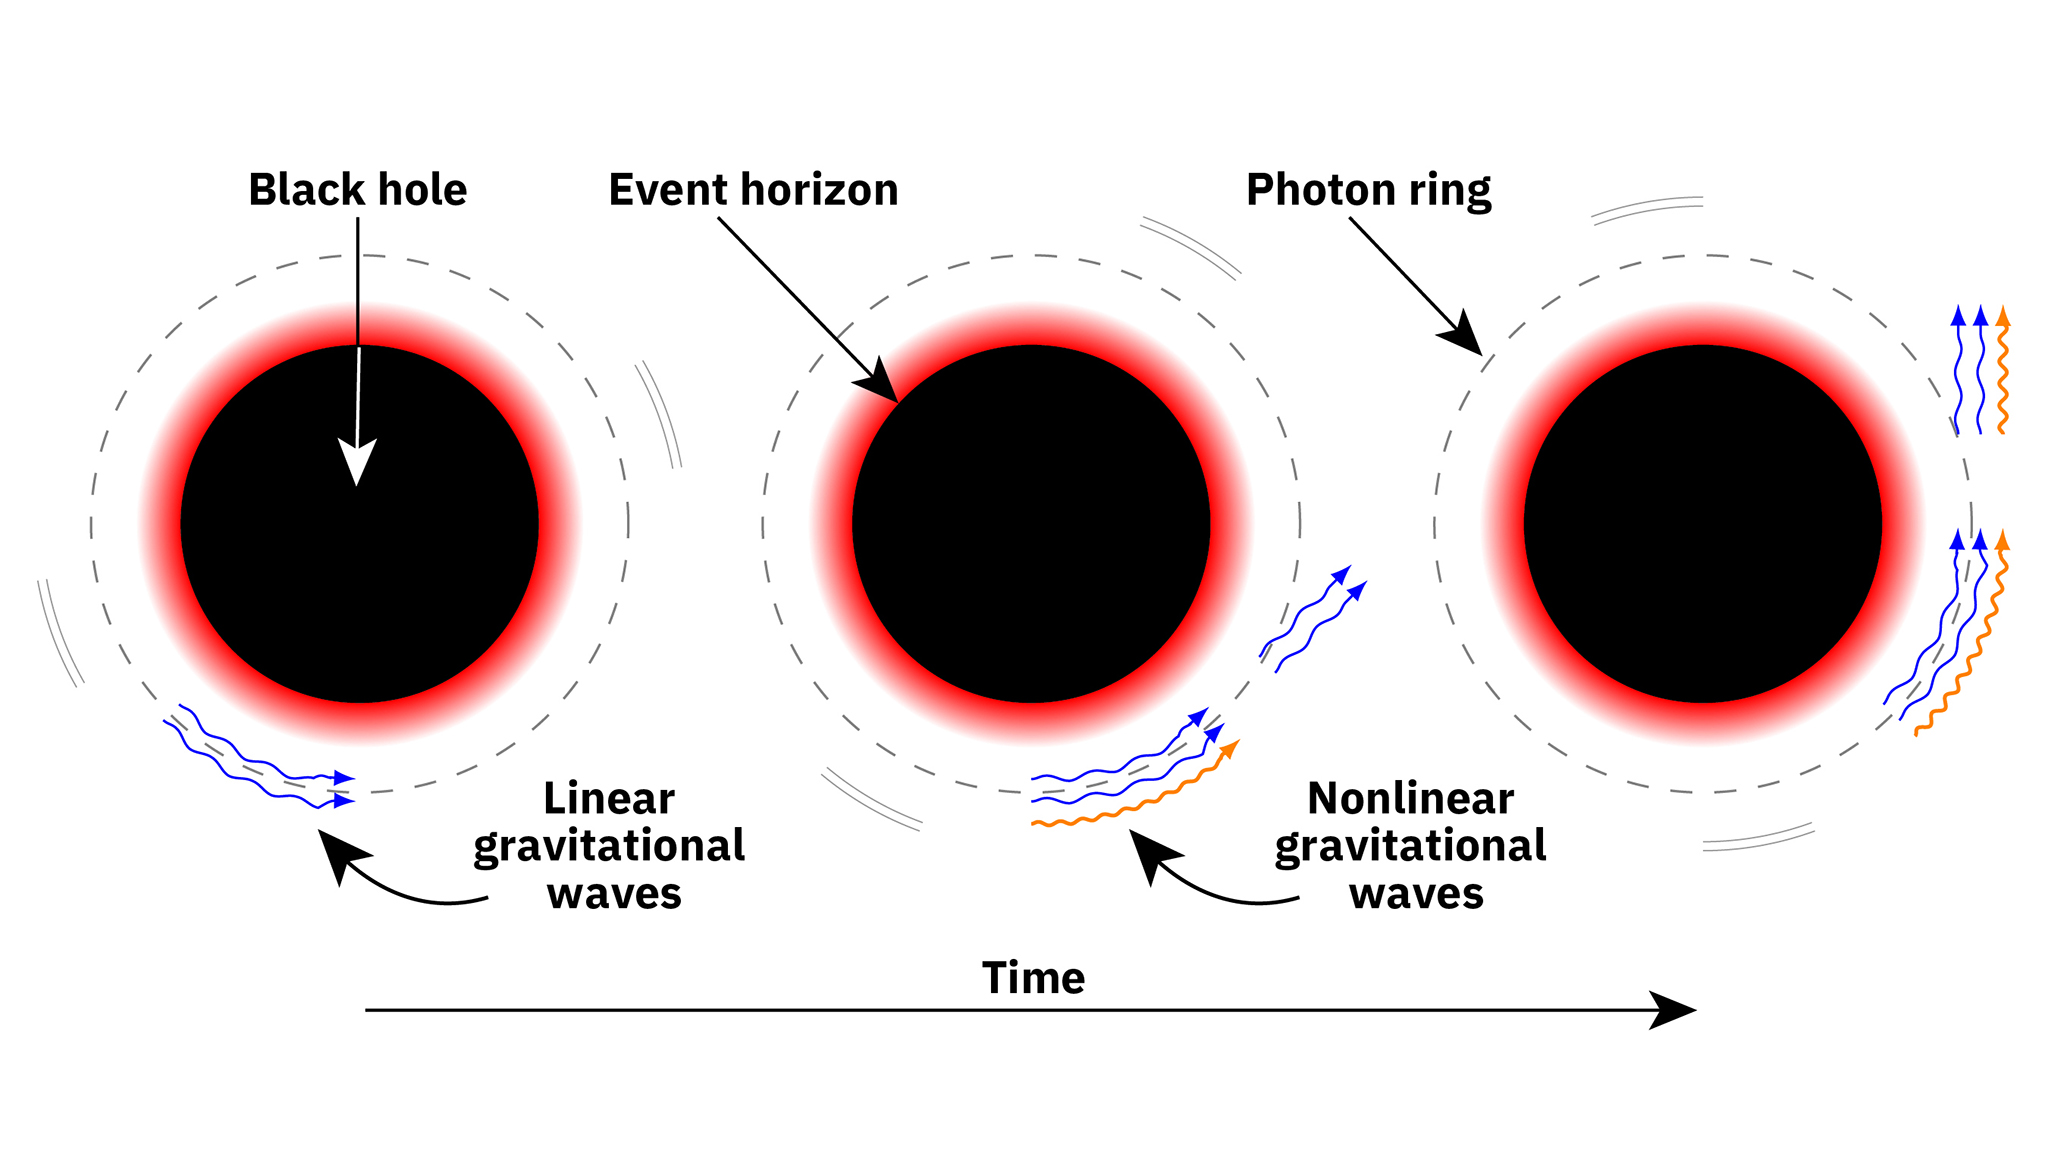 When two black holes merge, the resulting black hole produces gravitational waves as it ‘rings down’ to a stable form. The waves are all linear at first, but as time goes by, the combined black hole also produces nonlinear gravitational waves. Graphic by Leo Stein and Stefanie Goodwiller/University of Mississippi